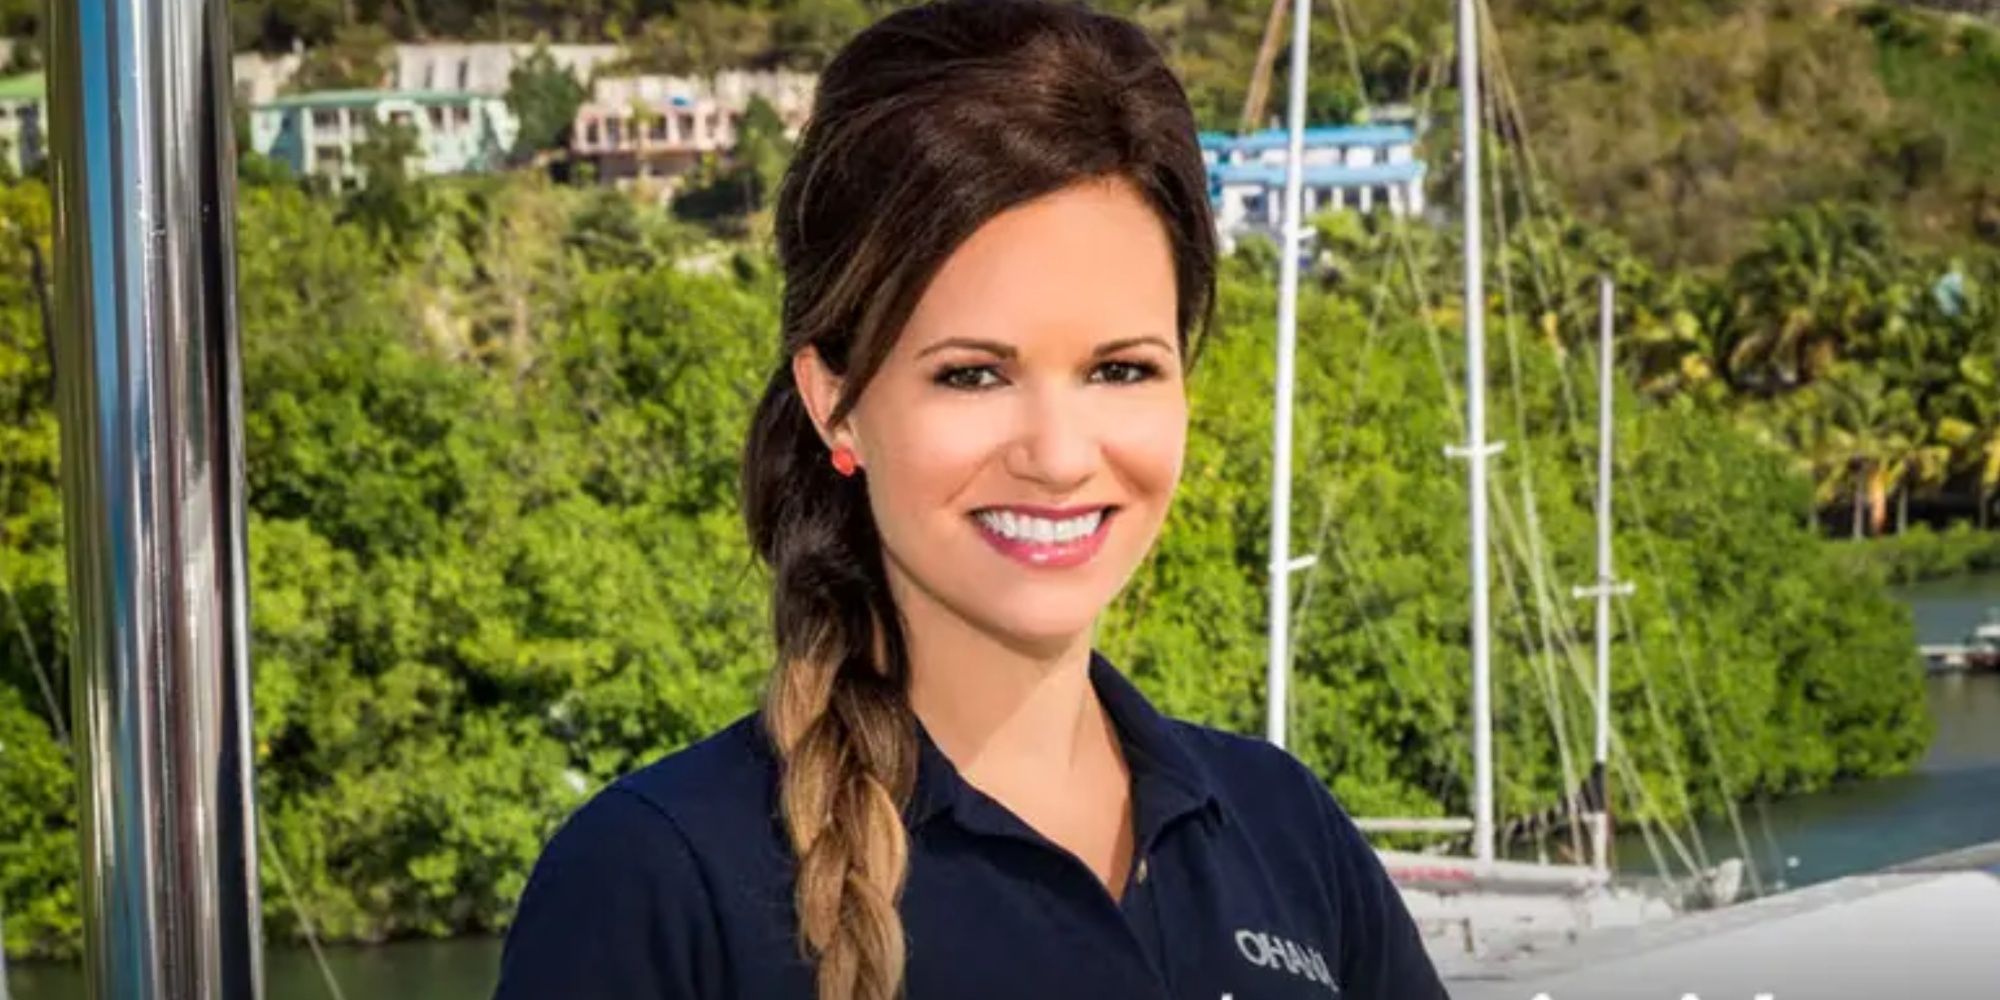 Amy Johnson on Below Deck smiling